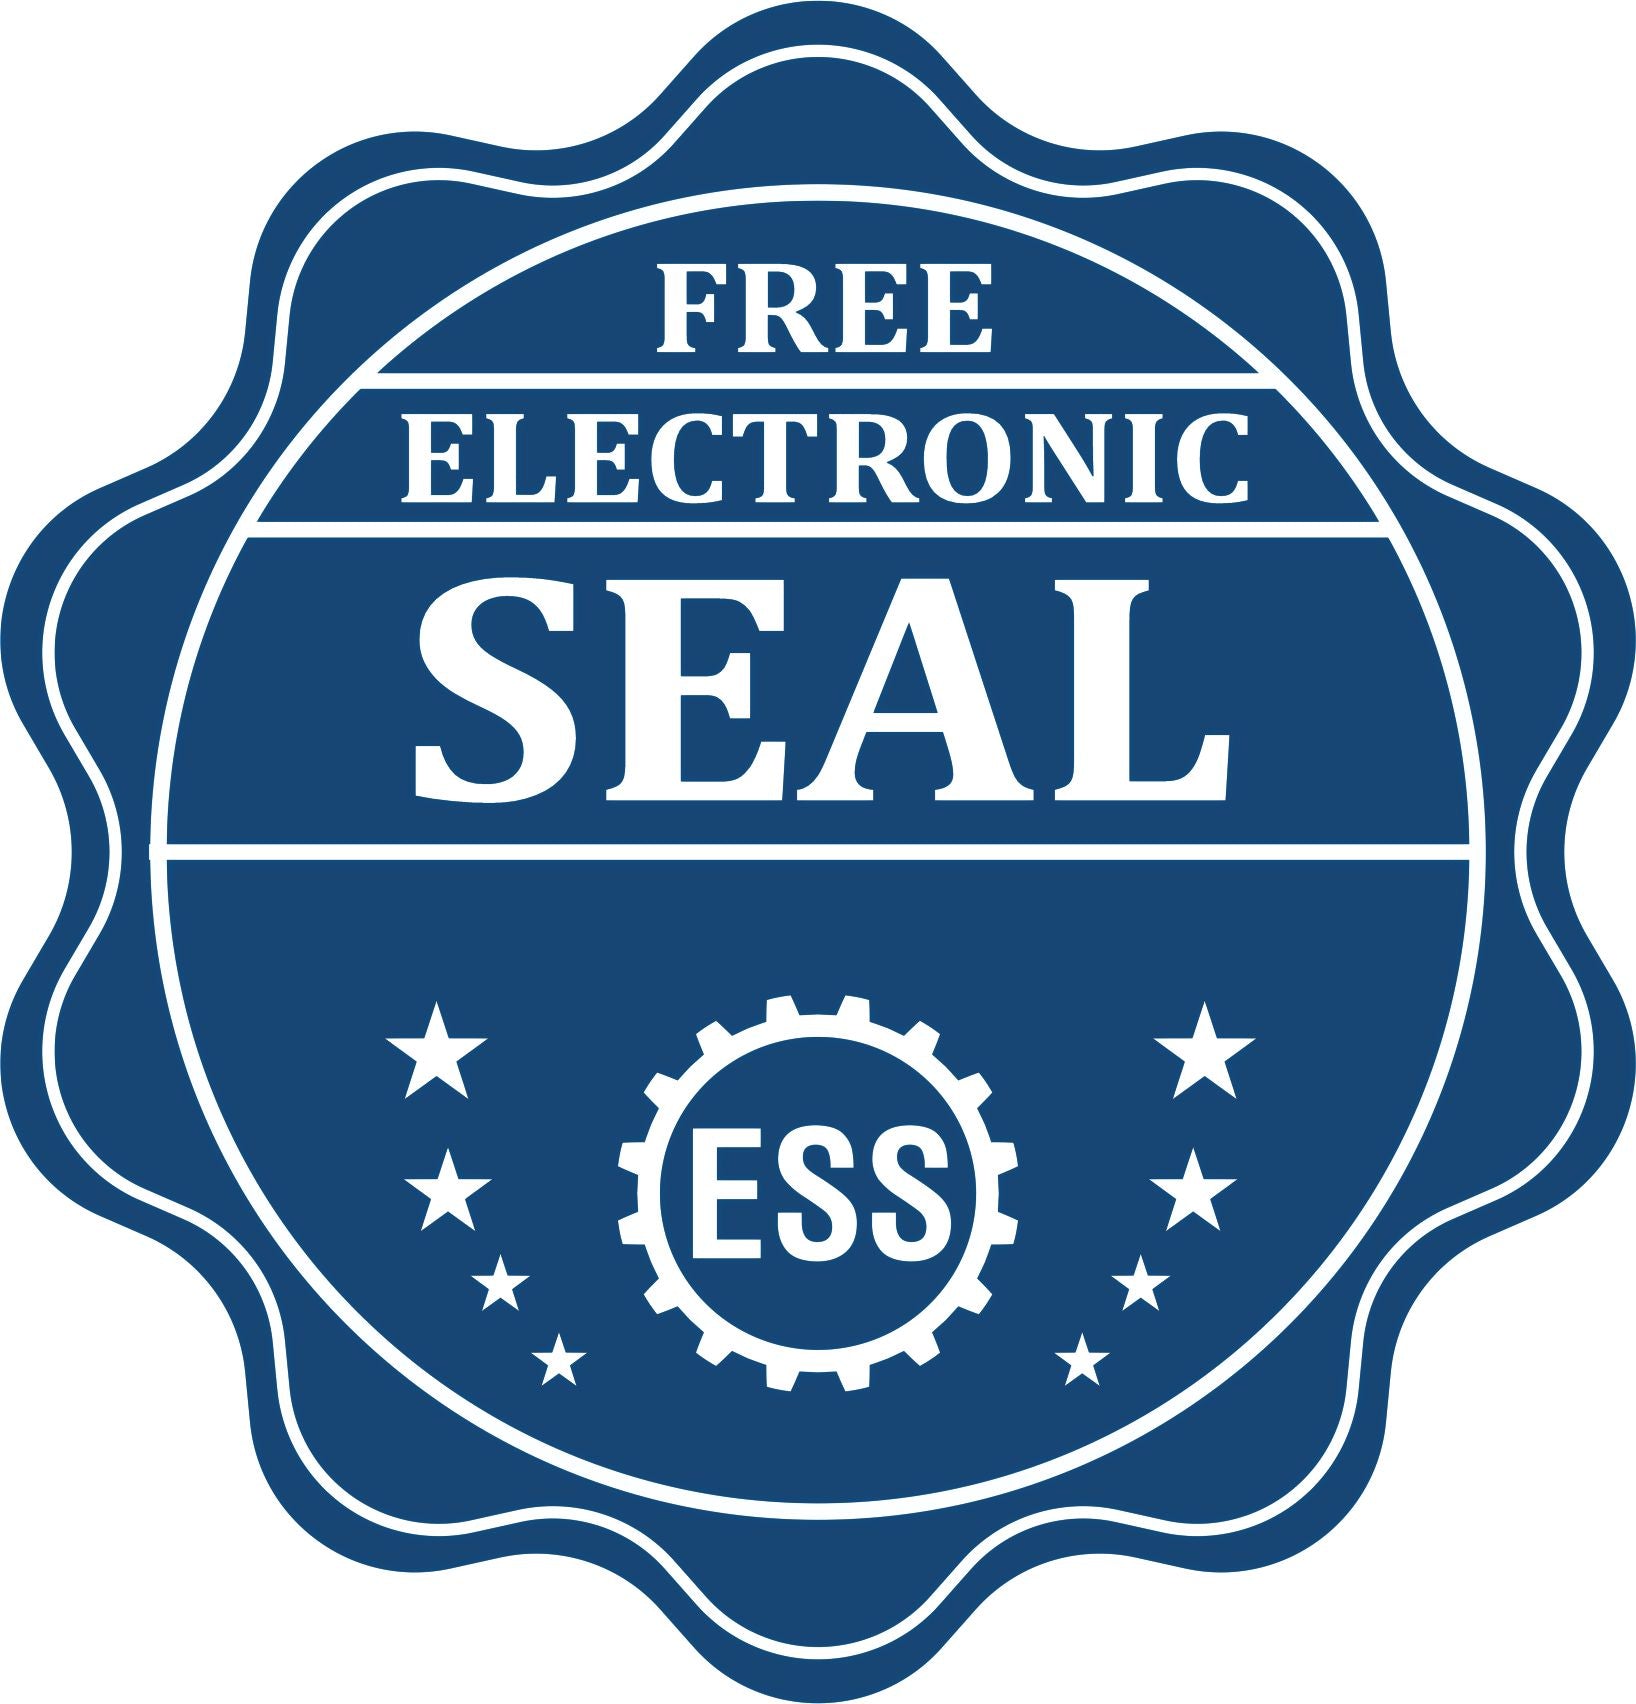 A badge showing a free electronic seal for the Handheld Arizona Professional Geologist Embosser with stars and the ESS gear on the emblem.